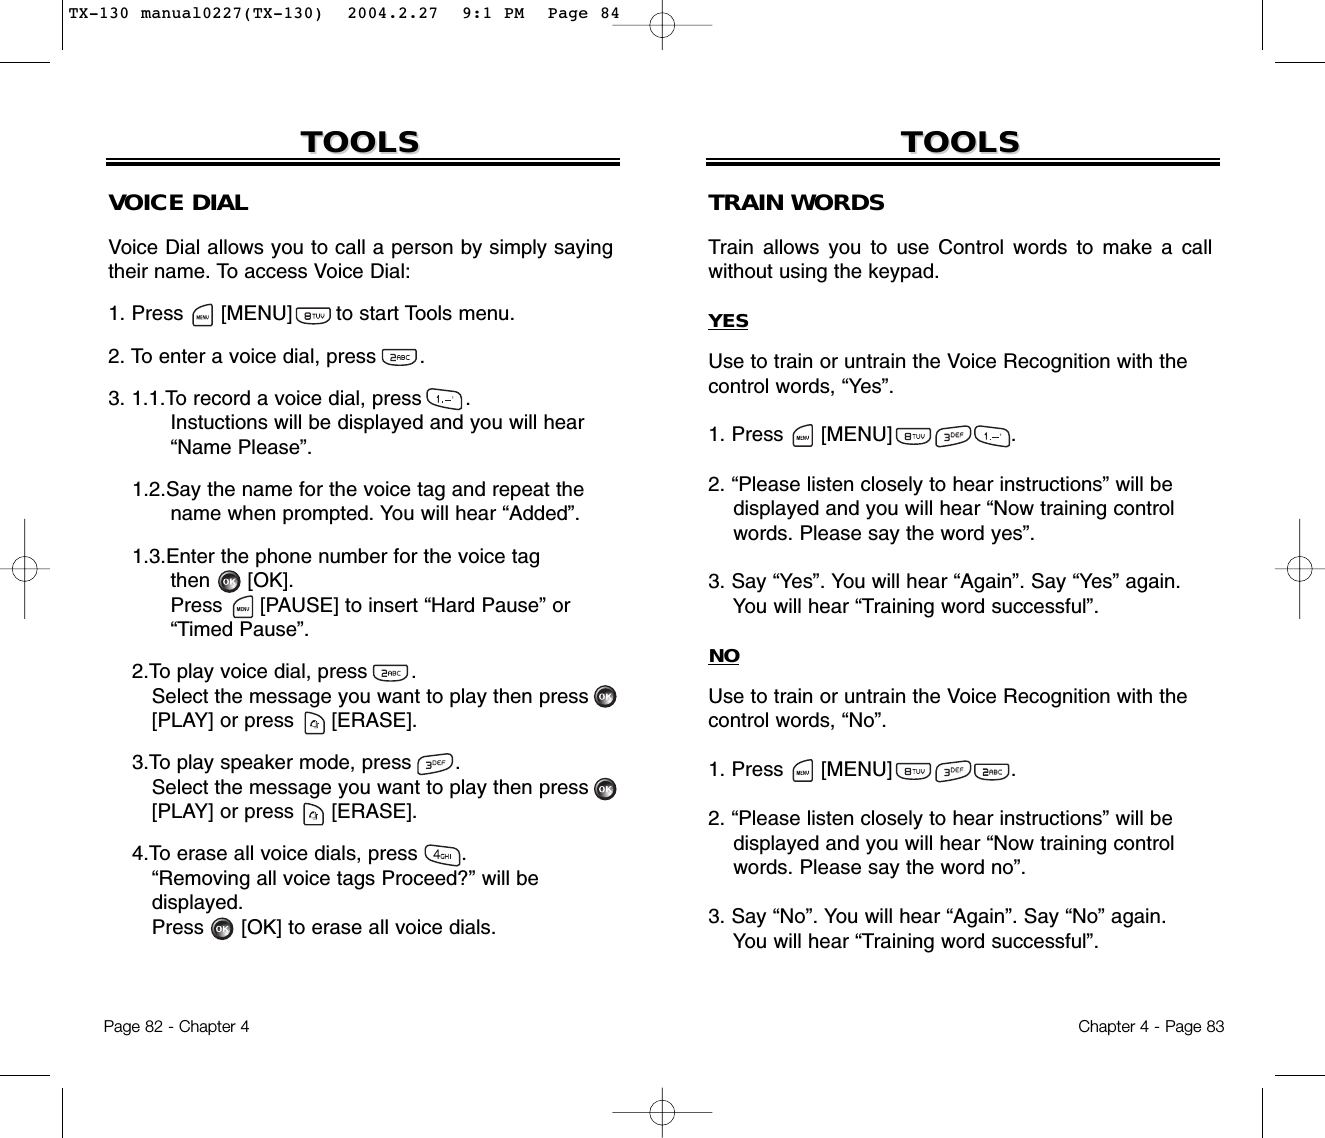 Chapter 4 - Page 83TOOLSTOOLSTRAIN WORDSTrain allows you to use Control words to make a callwithout using the keypad.YESUse to train or untrain the Voice Recognition with thecontrol words, “Yes”.1. Press      [MENU]                   .2. “Please listen closely to hear instructions” will bedisplayed and you will hear “Now training controlwords. Please say the word yes”.3. Say “Yes”. You will hear “Again”. Say “Yes” again.You will hear “Training word successful”.NOUse to train or untrain the Voice Recognition with thecontrol words, “No”.1. Press      [MENU]                   .2. “Please listen closely to hear instructions” will be displayed and you will hear “Now training control words. Please say the word no”.3. Say “No”. You will hear “Again”. Say “No” again. You will hear “Training word successful”.Page 82 - Chapter 4TOOLSTOOLSVOICE DIALVoice Dial allows you to call a person by simply sayingtheir name. To access Voice Dial:1. Press      [MENU]       to start Tools menu.2. To enter a voice dial, press       .3. 1.1.To record a voice dial, press       .Instuctions will be displayed and you will hear“Name Please”.1.2.Say the name for the voice tag and repeat thename when prompted. You will hear “Added”.1.3.Enter the phone number for the voice tagthen [OK].Press [PAUSE] to insert “Hard Pause” or“Timed Pause”.2.To play voice dial, press       . Select the message you want to play then press [PLAY] or press [ERASE].3.To play speaker mode, press       . Select the message you want to play then press [PLAY] or press [ERASE].4.To erase all voice dials, press       . “Removing all voice tags Proceed?” will bedisplayed.Press [OK] to erase all voice dials.TX-130 manual0227(TX-130)  2004.2.27  9:1 PM  Page 84